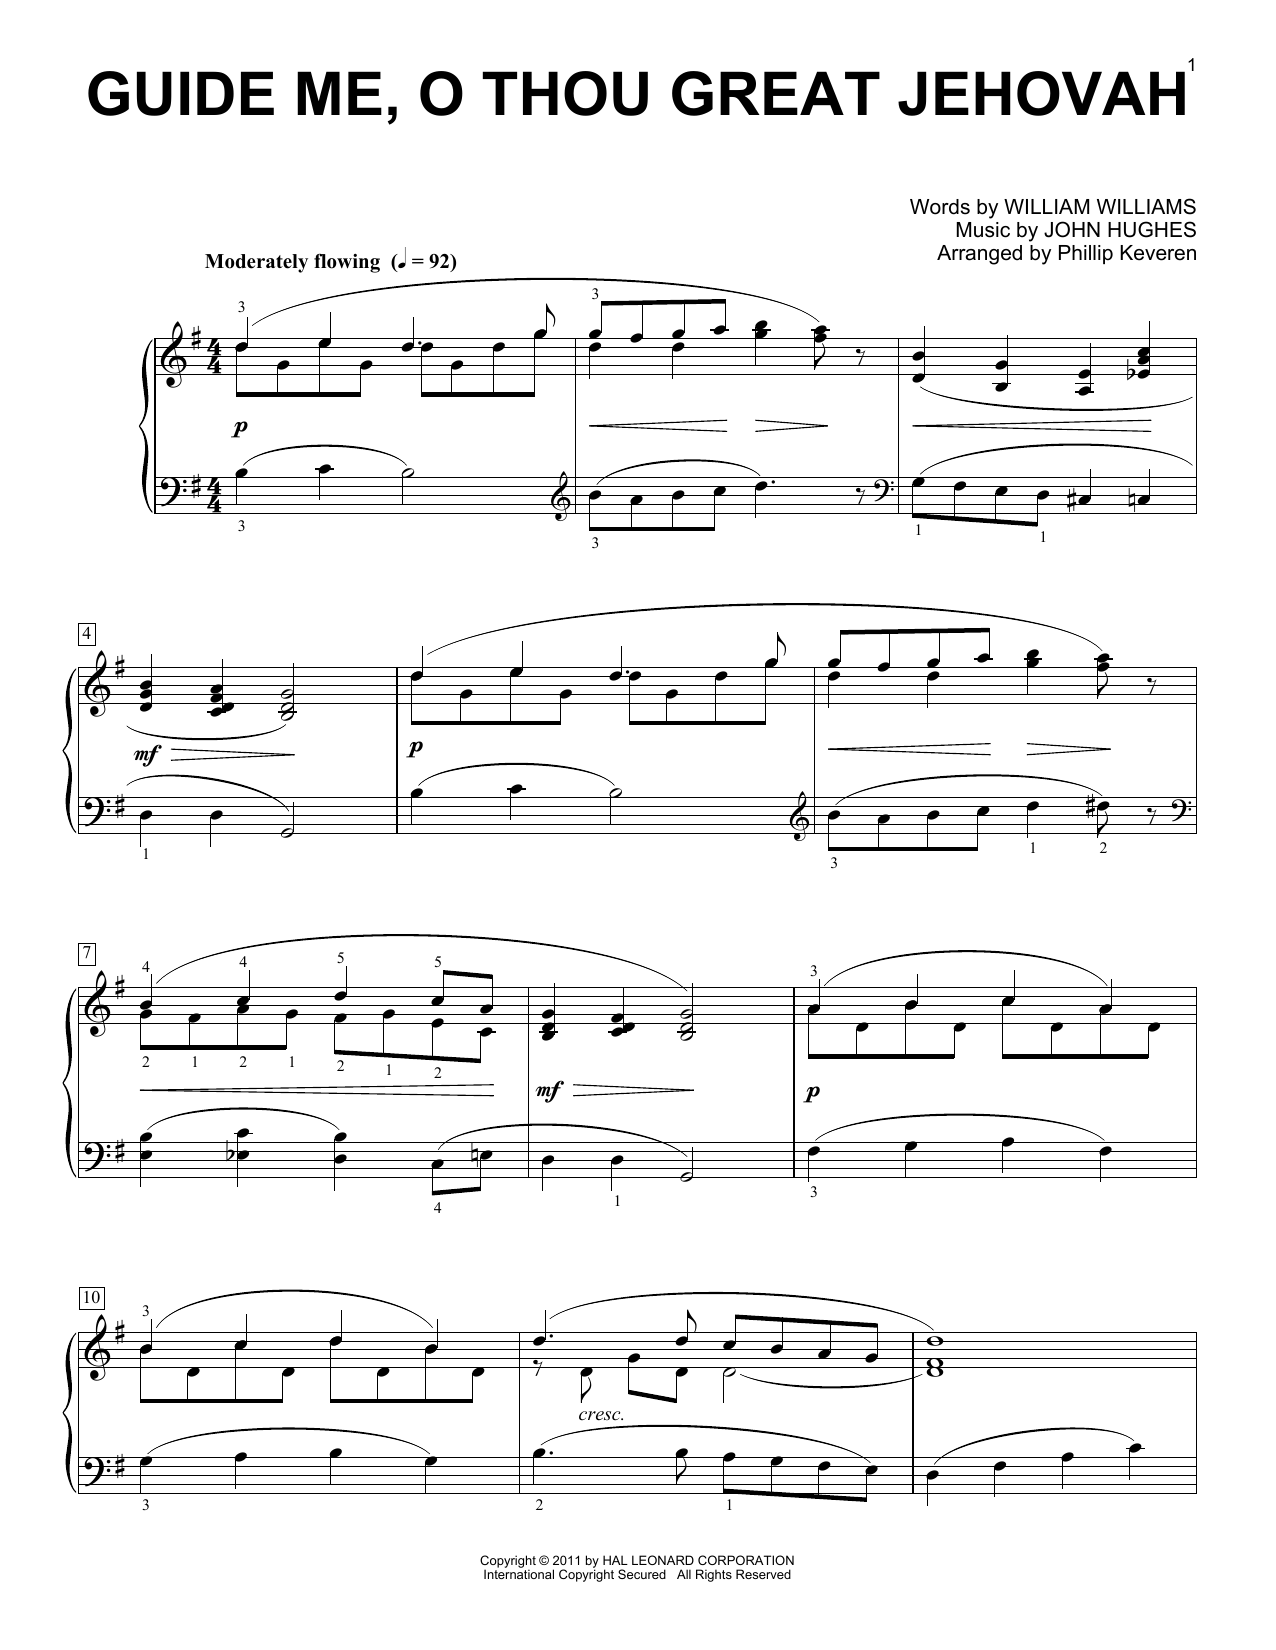 Download William Williams Guide Me, O Thou Great Jehovah [Classic Sheet Music